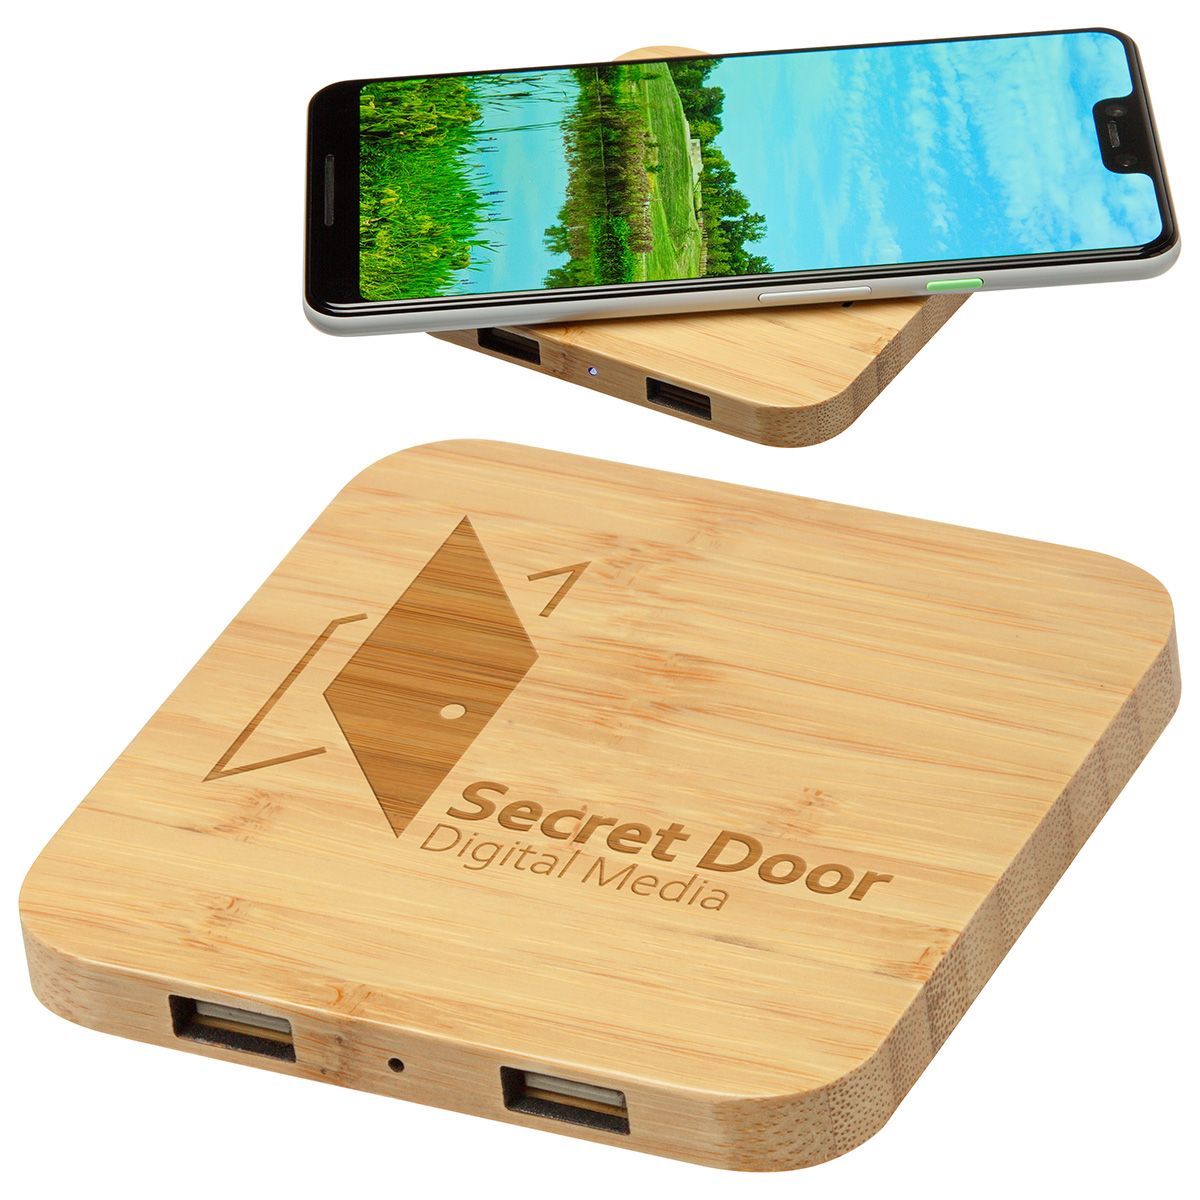 4. Panda Bamboo 5W Wireless Charger with Dual USB Ports